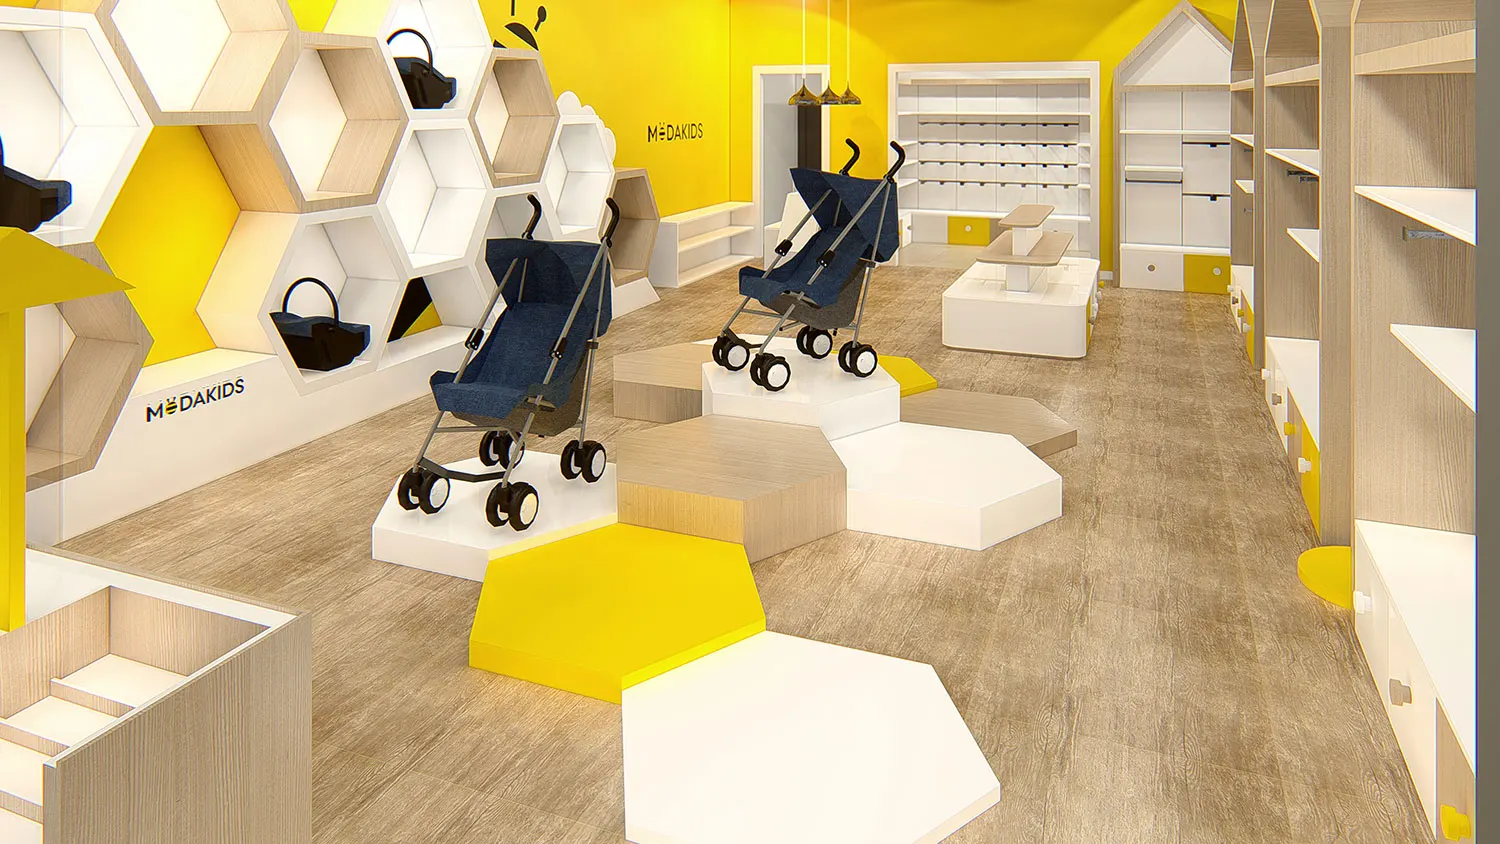 Interior design project for Modakids. Designed 3D rendering to create a trendy retail store